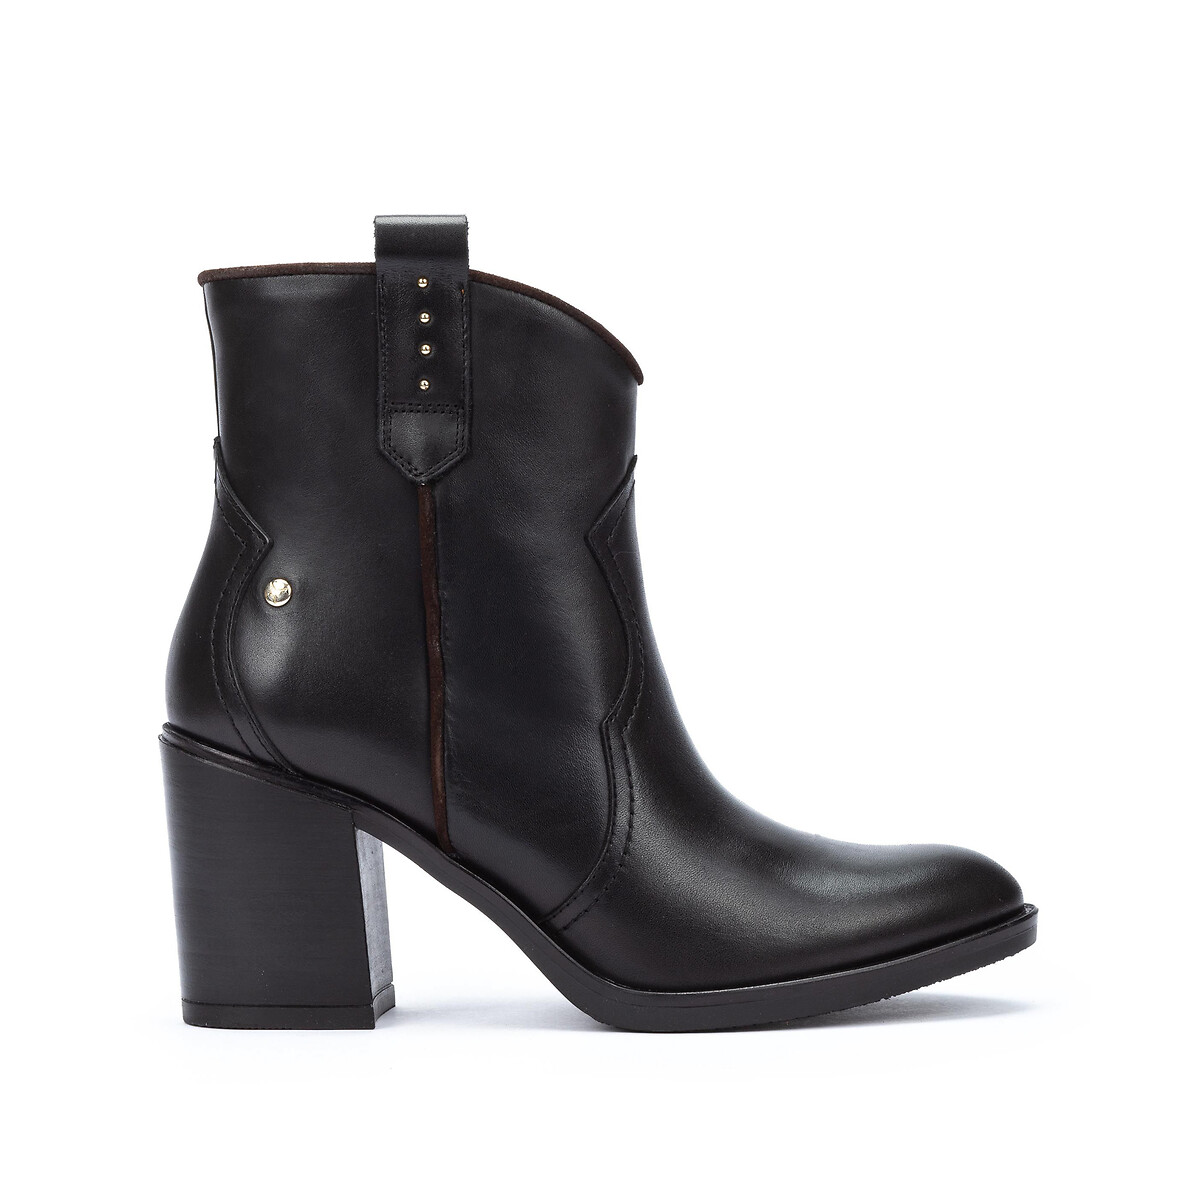 Rioja Leather Ankle Boots